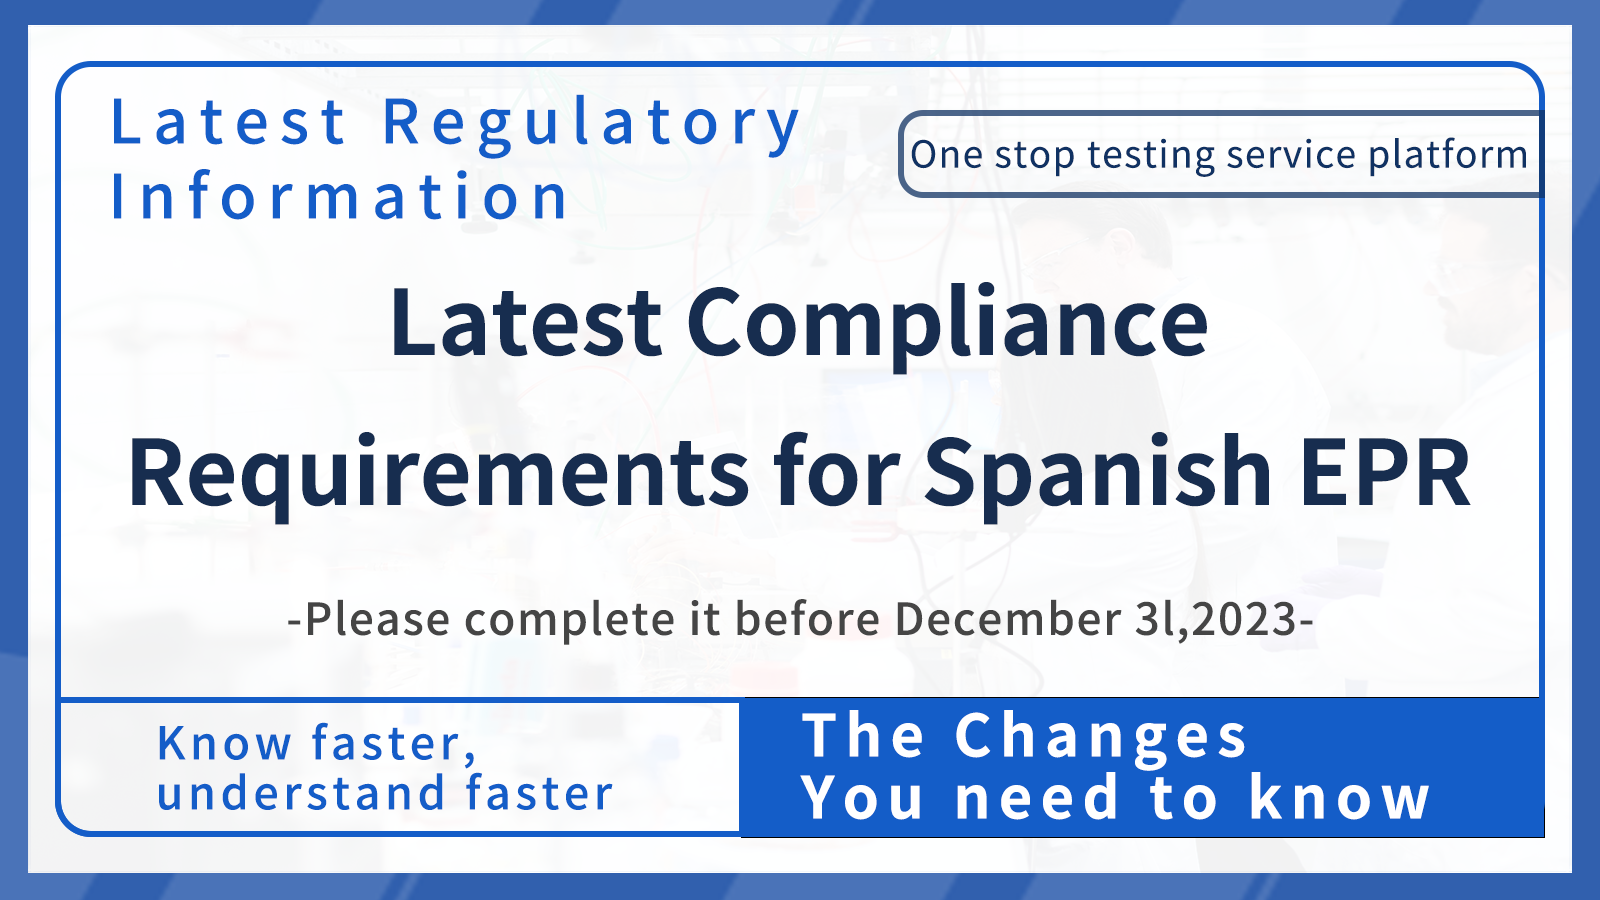 Spain EPR latest compliance requirements, please complete before 2023/12/31!